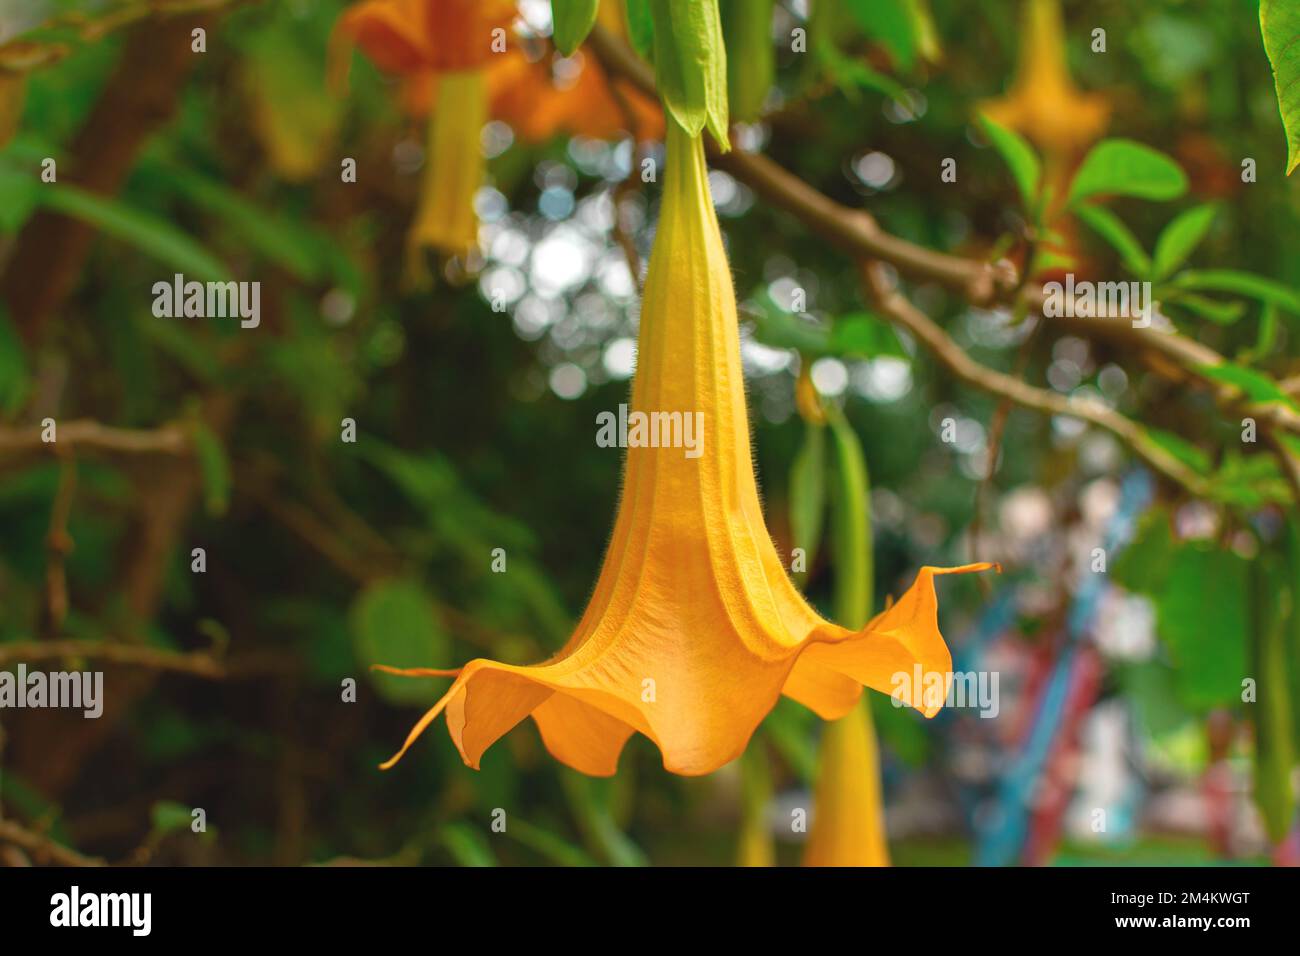 A closeup shot of Angel's trumpet flower with yellow petals against green leaves Stock Photo